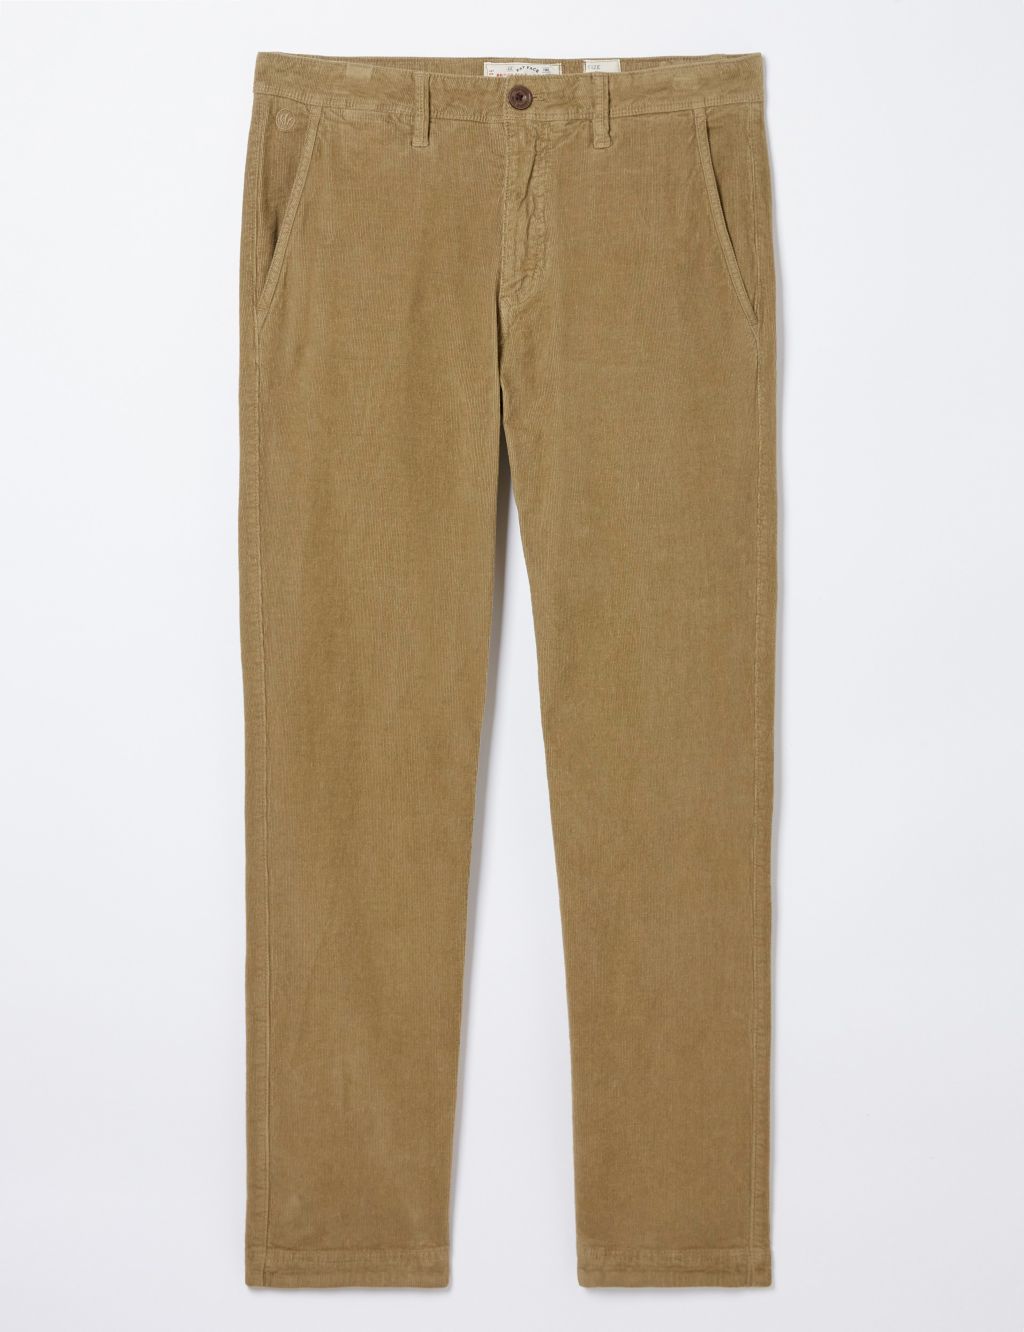 Straight Fit Corduroy Trousers image 2